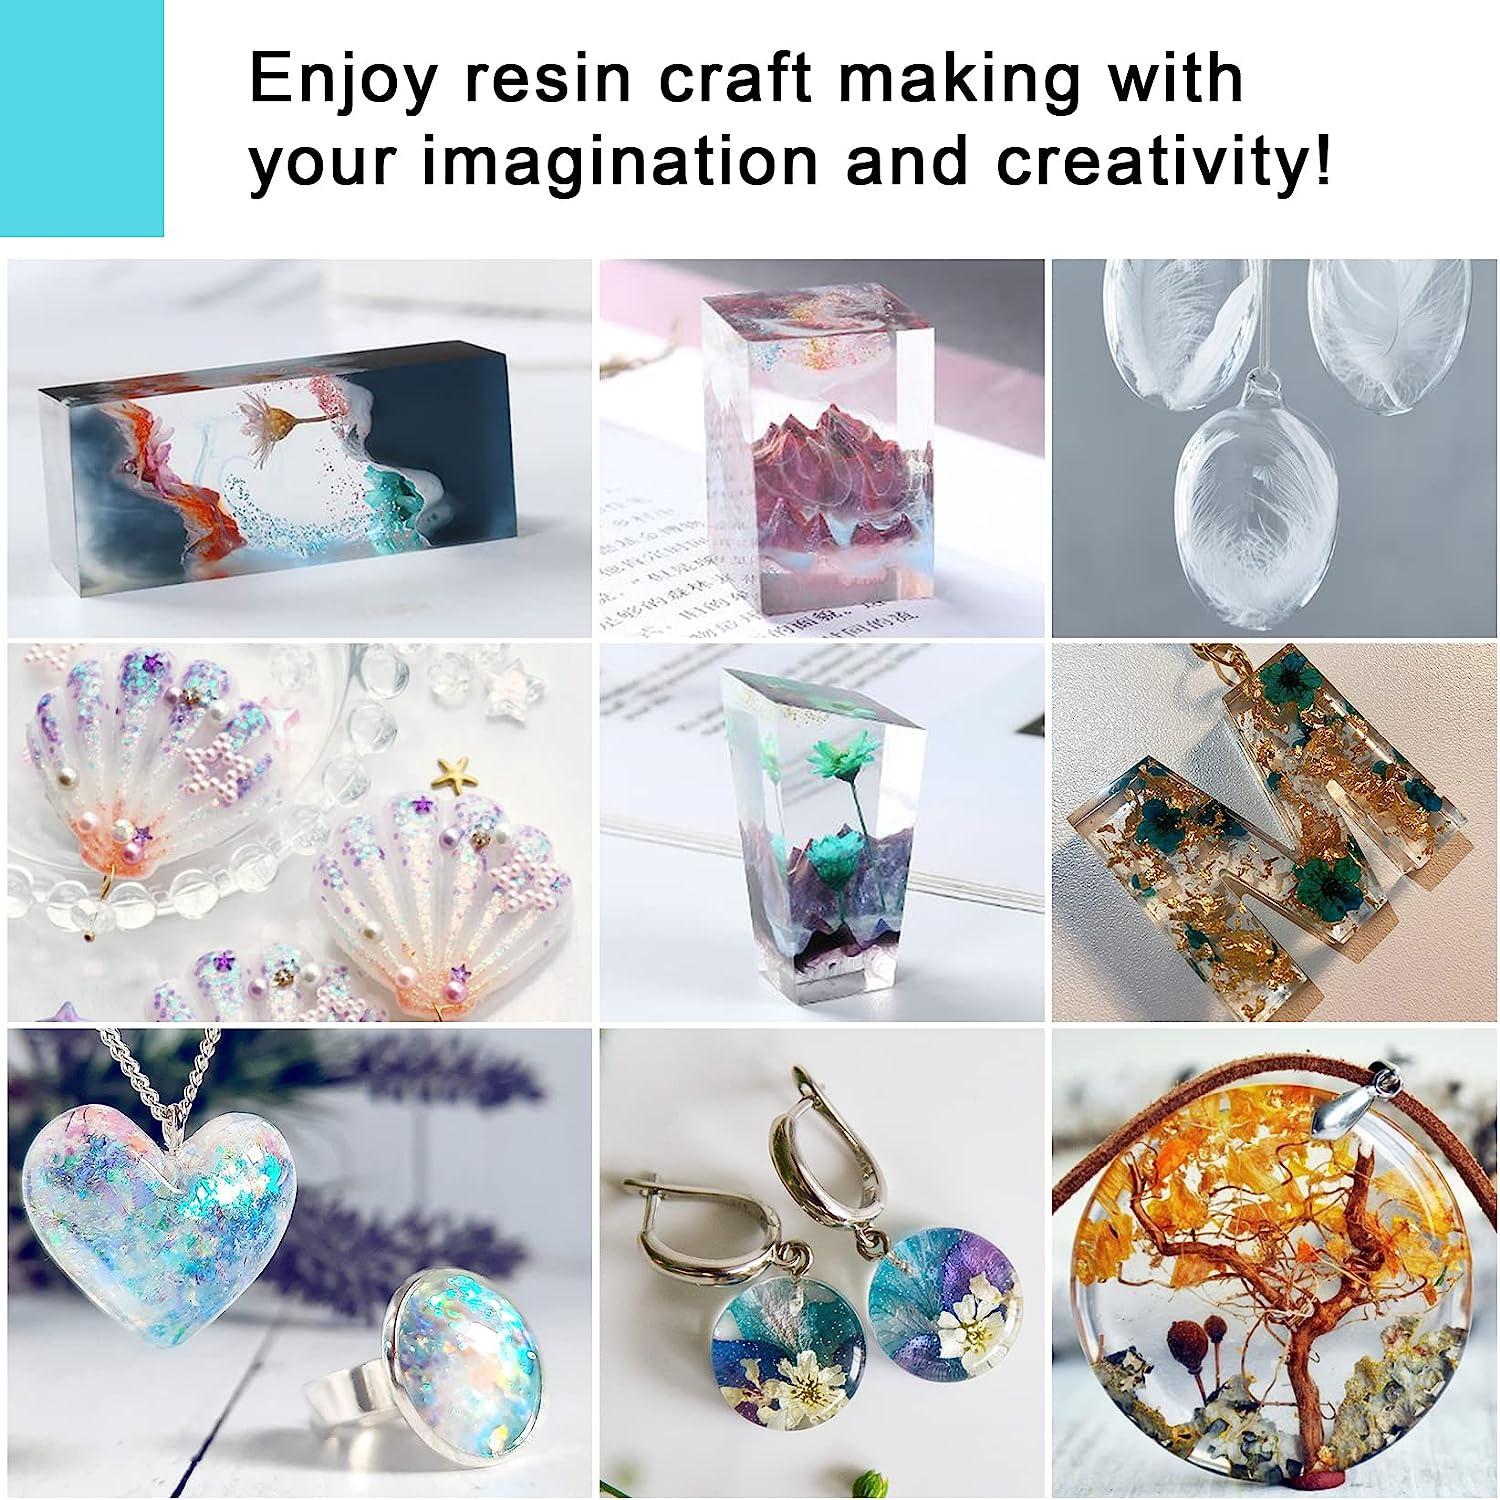 Epoxy Resin AB Part - 1 Gallon Crystal Clear Resin Kit for Art Craft Resin  Jewelry Making River Tables Casting and Coating 10 Mica Pigments, 2 Glow in